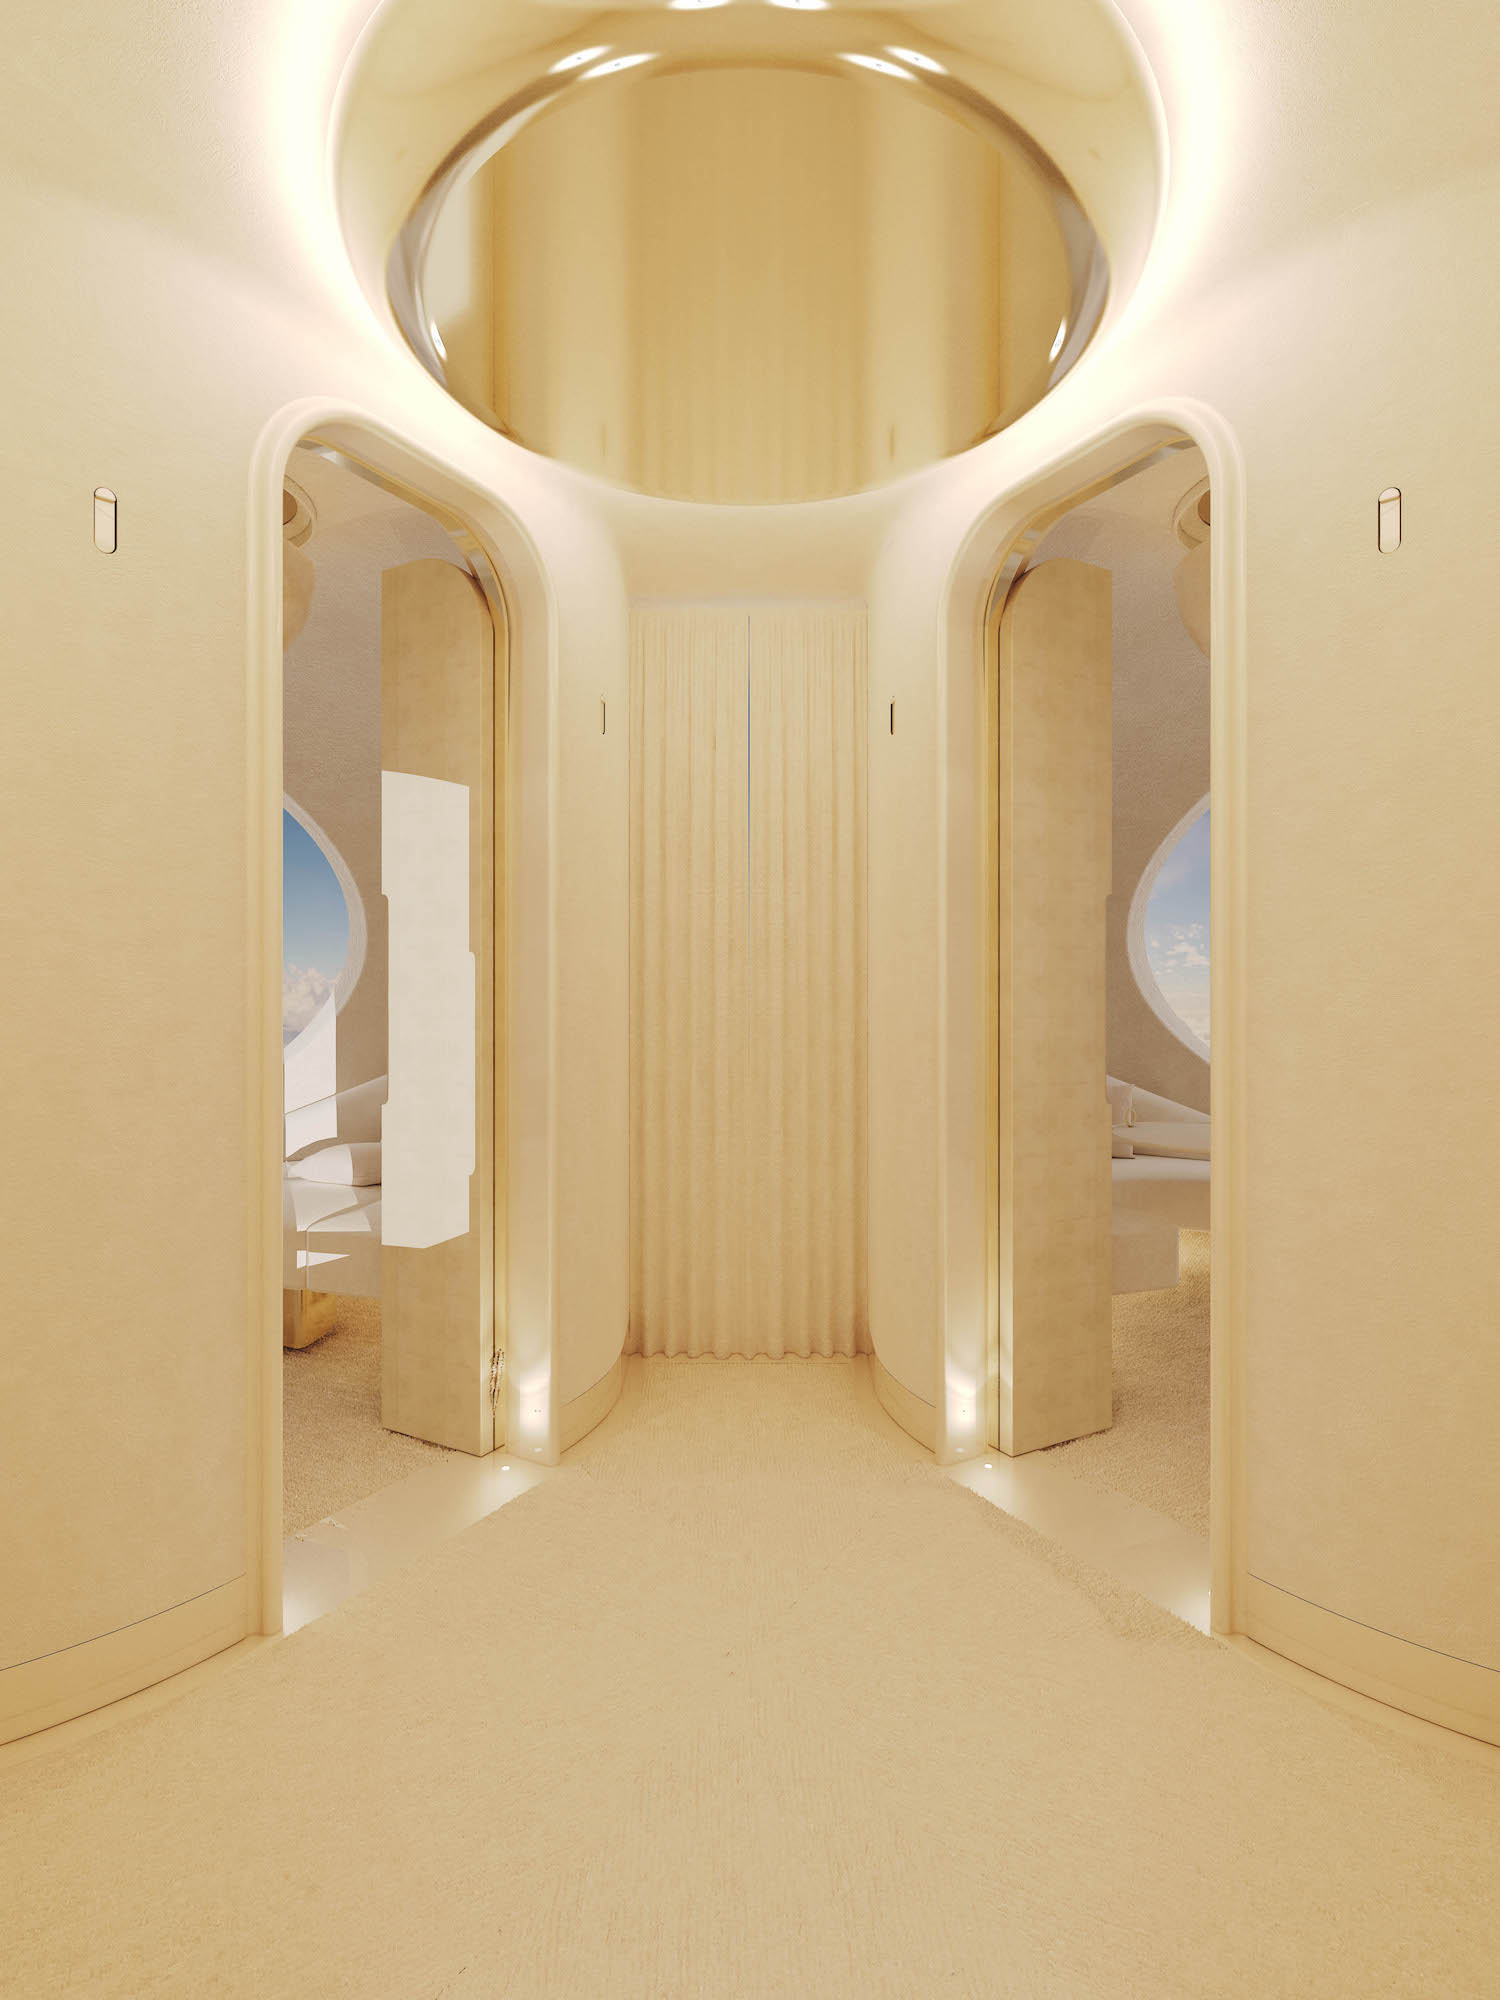 Interior lobby of the Zephalto space capsule Céleste leading to two cabins – Effect Magazine